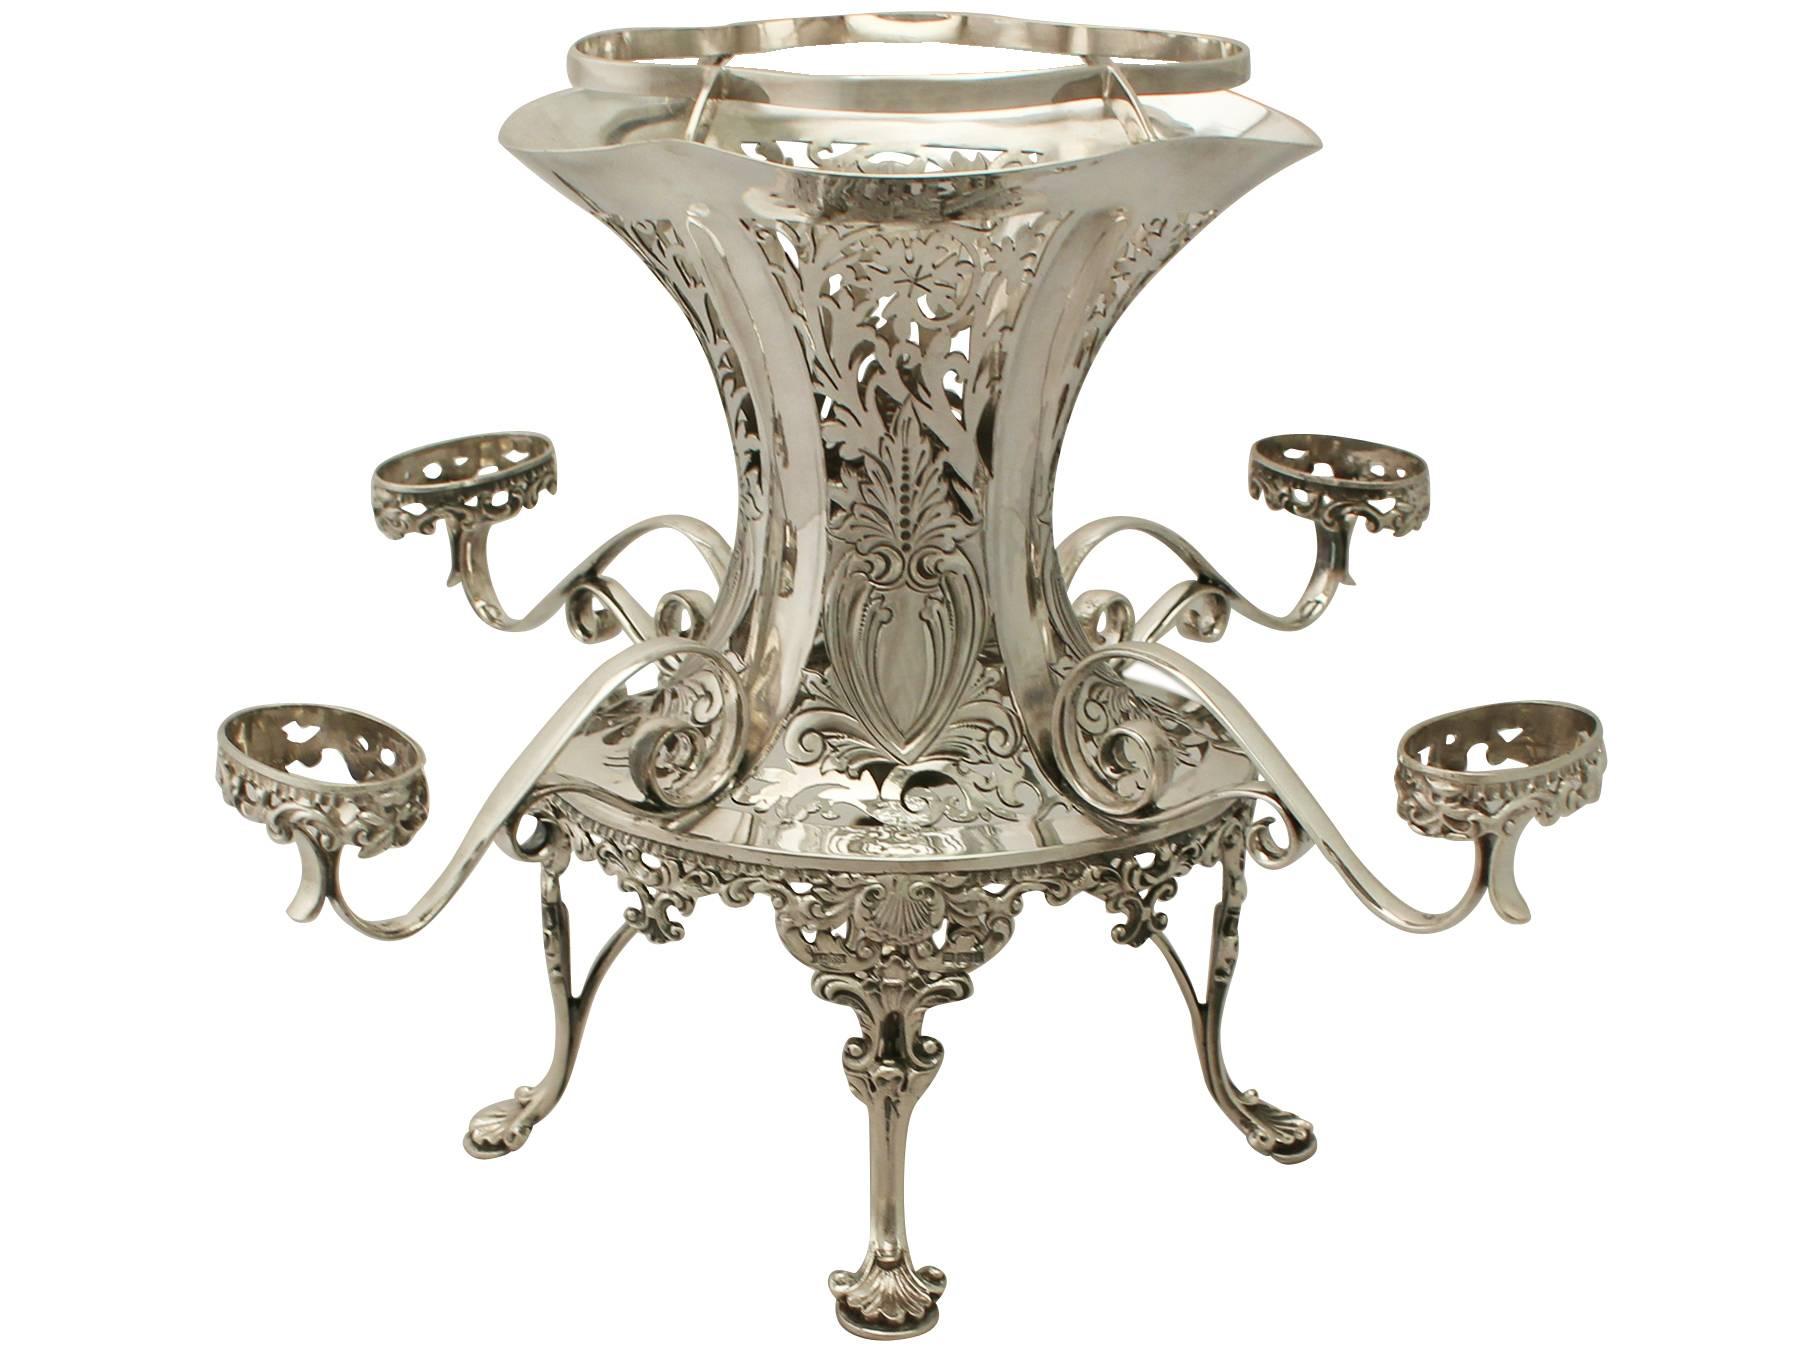 English Antique Edwardian Sterling Silver Epergne/Centerpiece